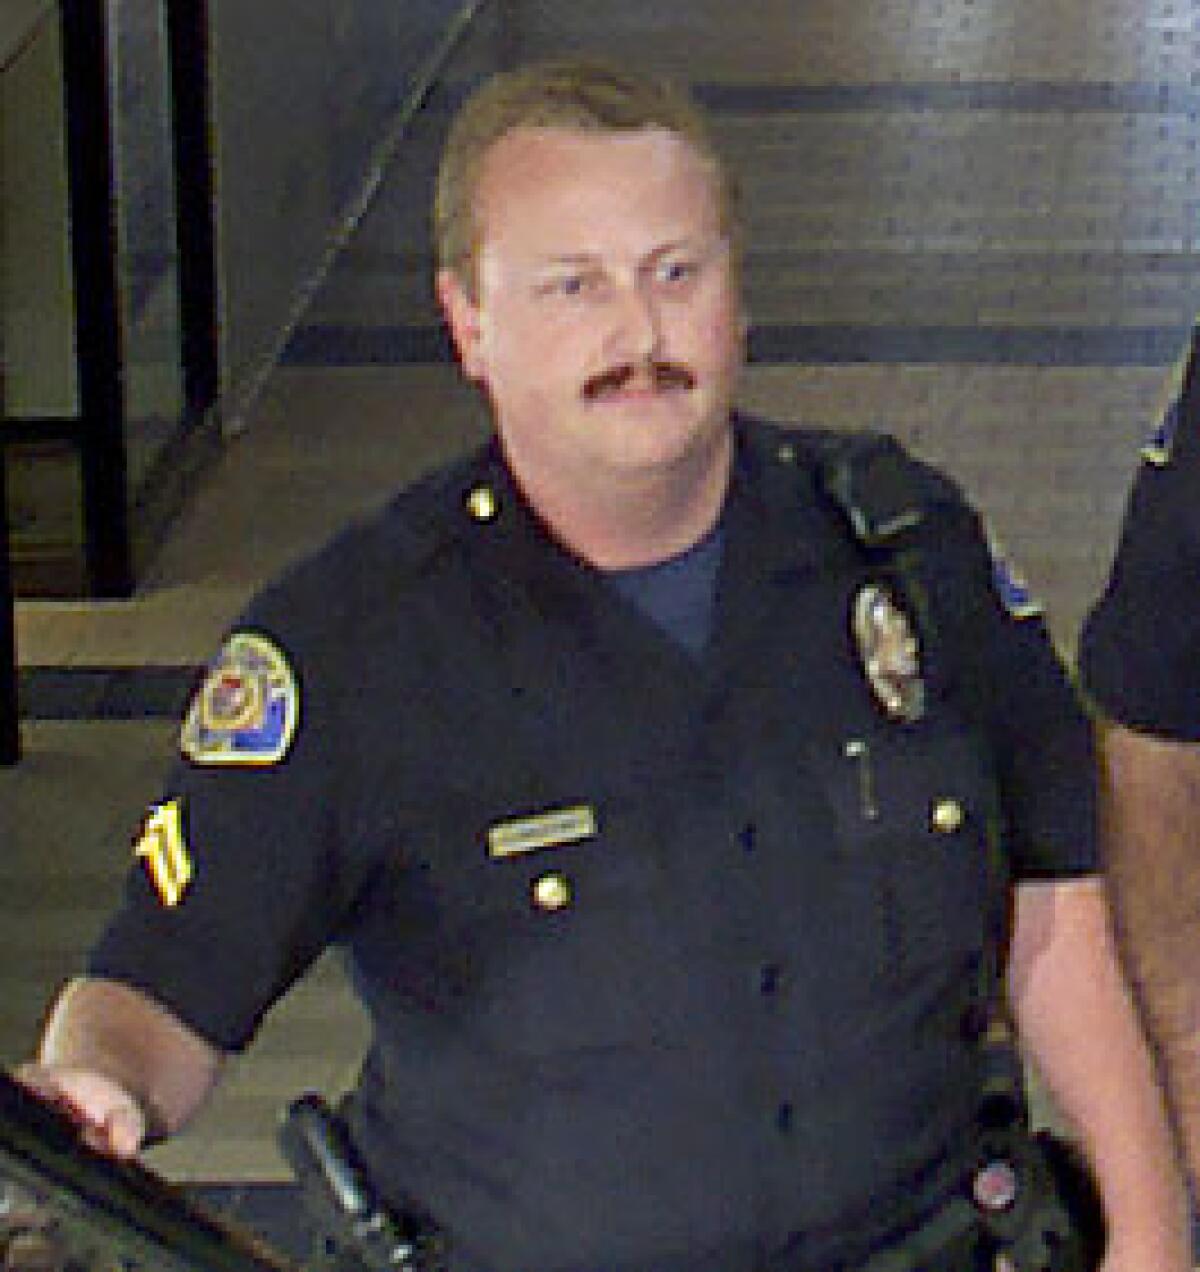 A police officer in uniform